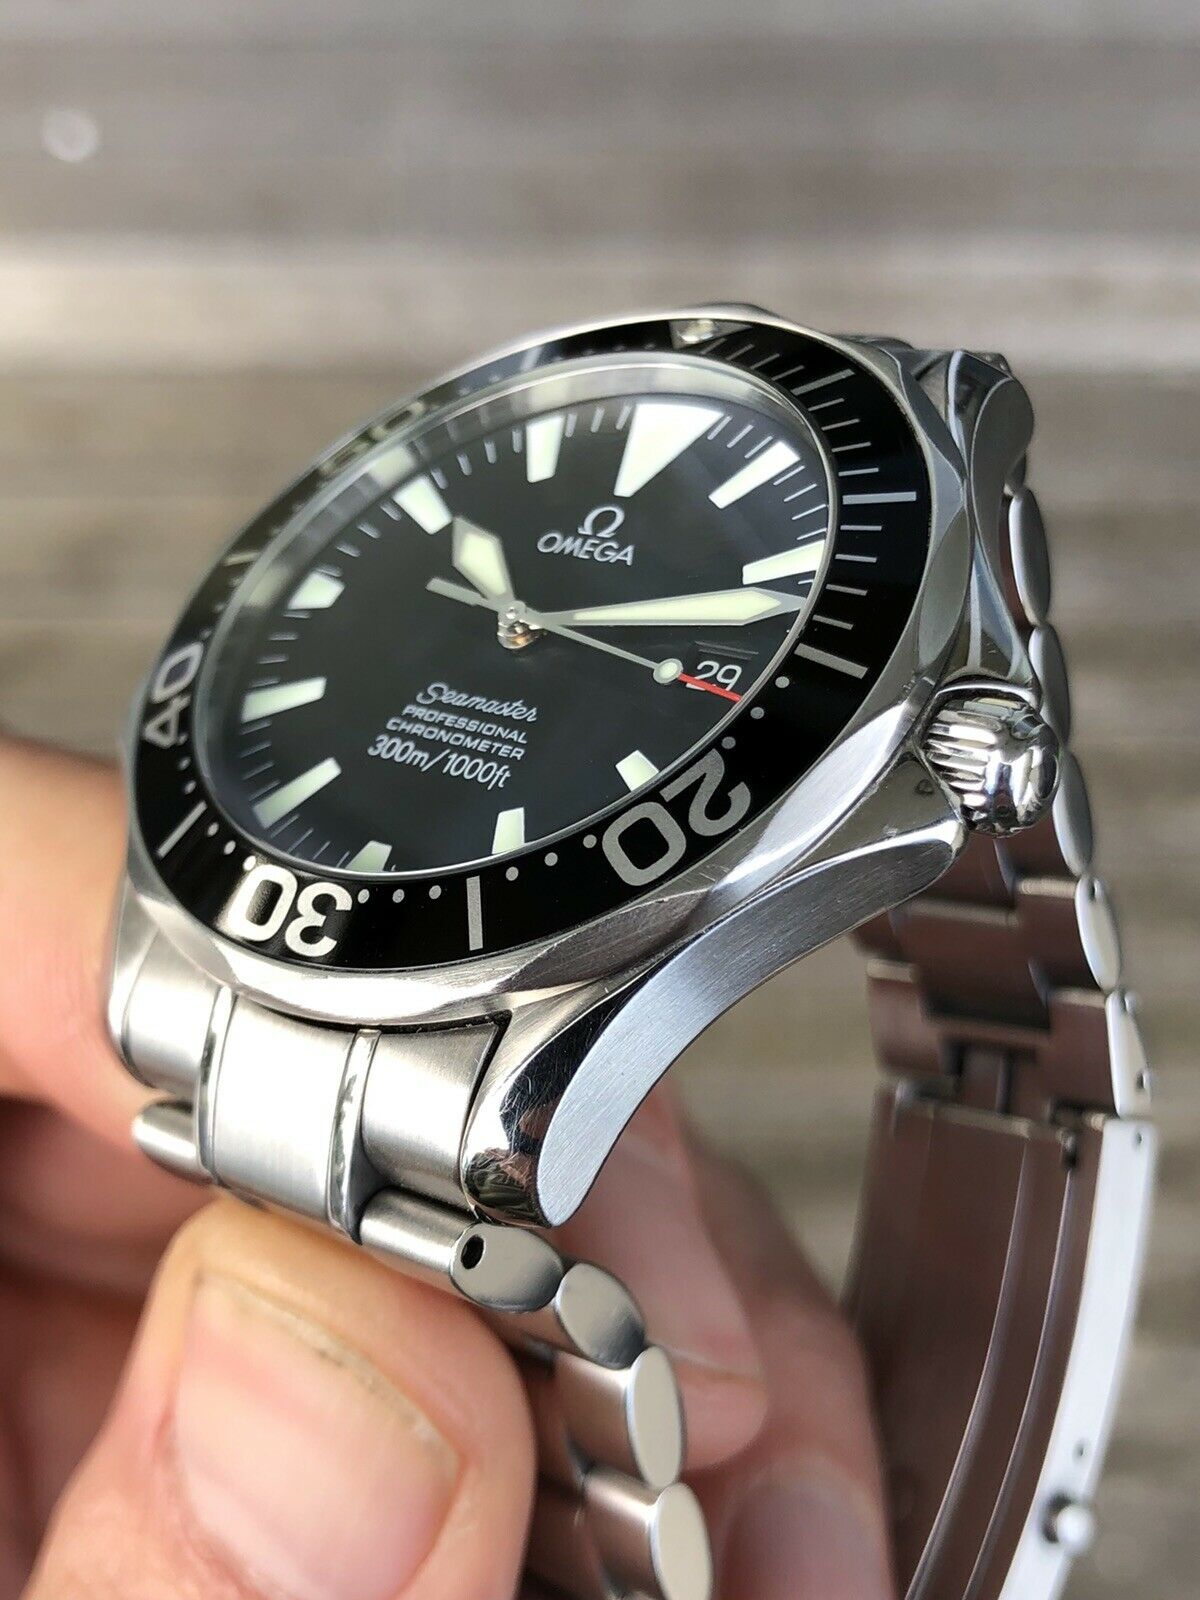 Omega_Seamaster_Professional_300M_2254.00_-_2007_w_box_and_papers_283_29.jpg